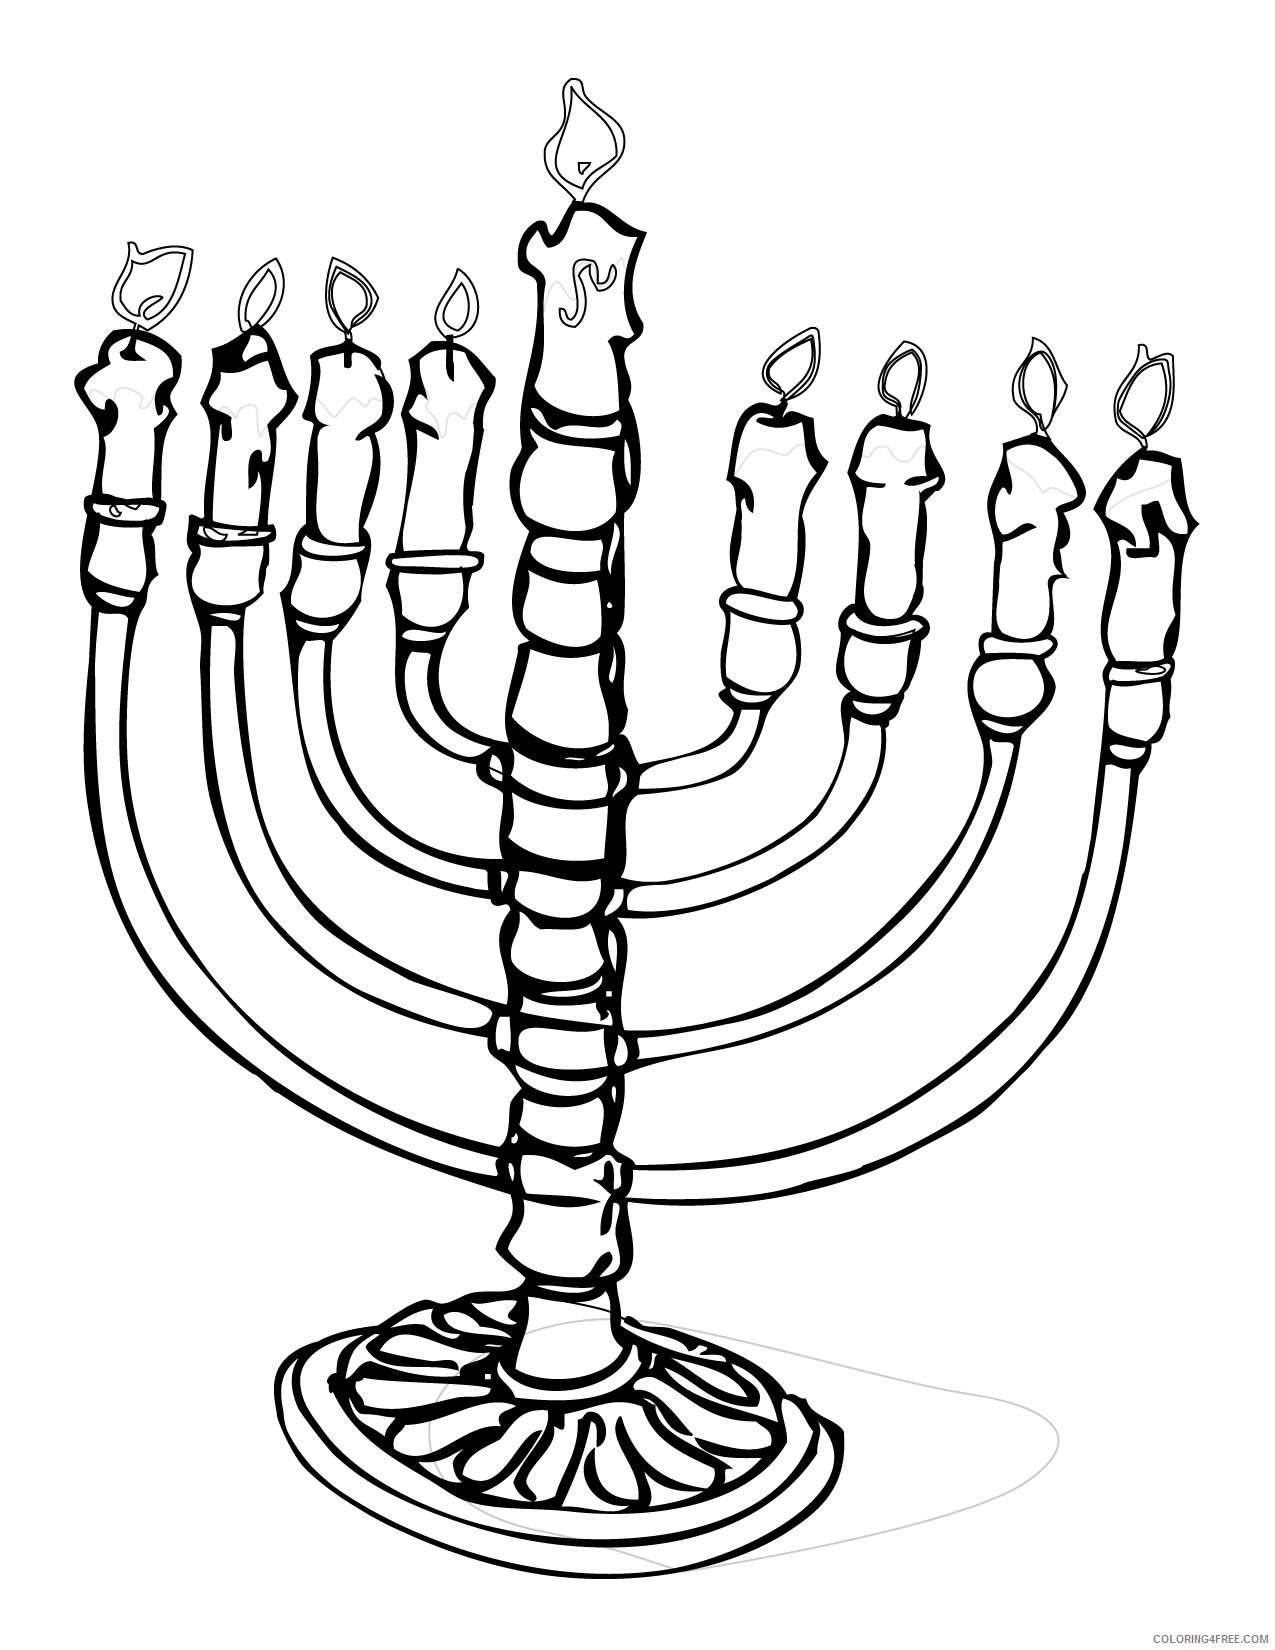 hanukkah coloring pages candle lighting Coloring4free